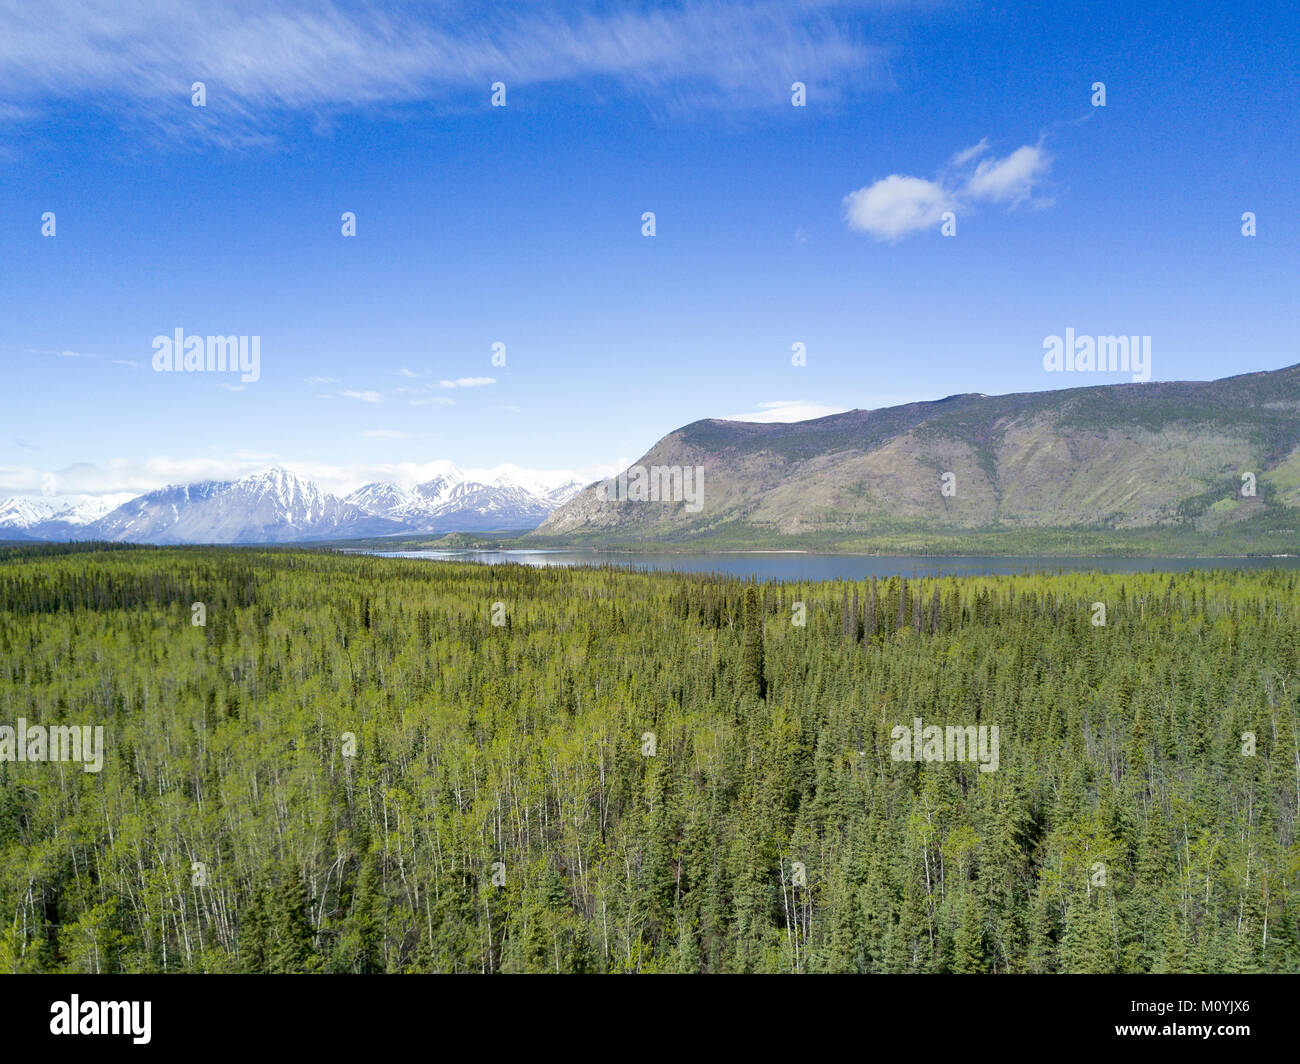 Scenic view of trees and river near mountain Stock Photo